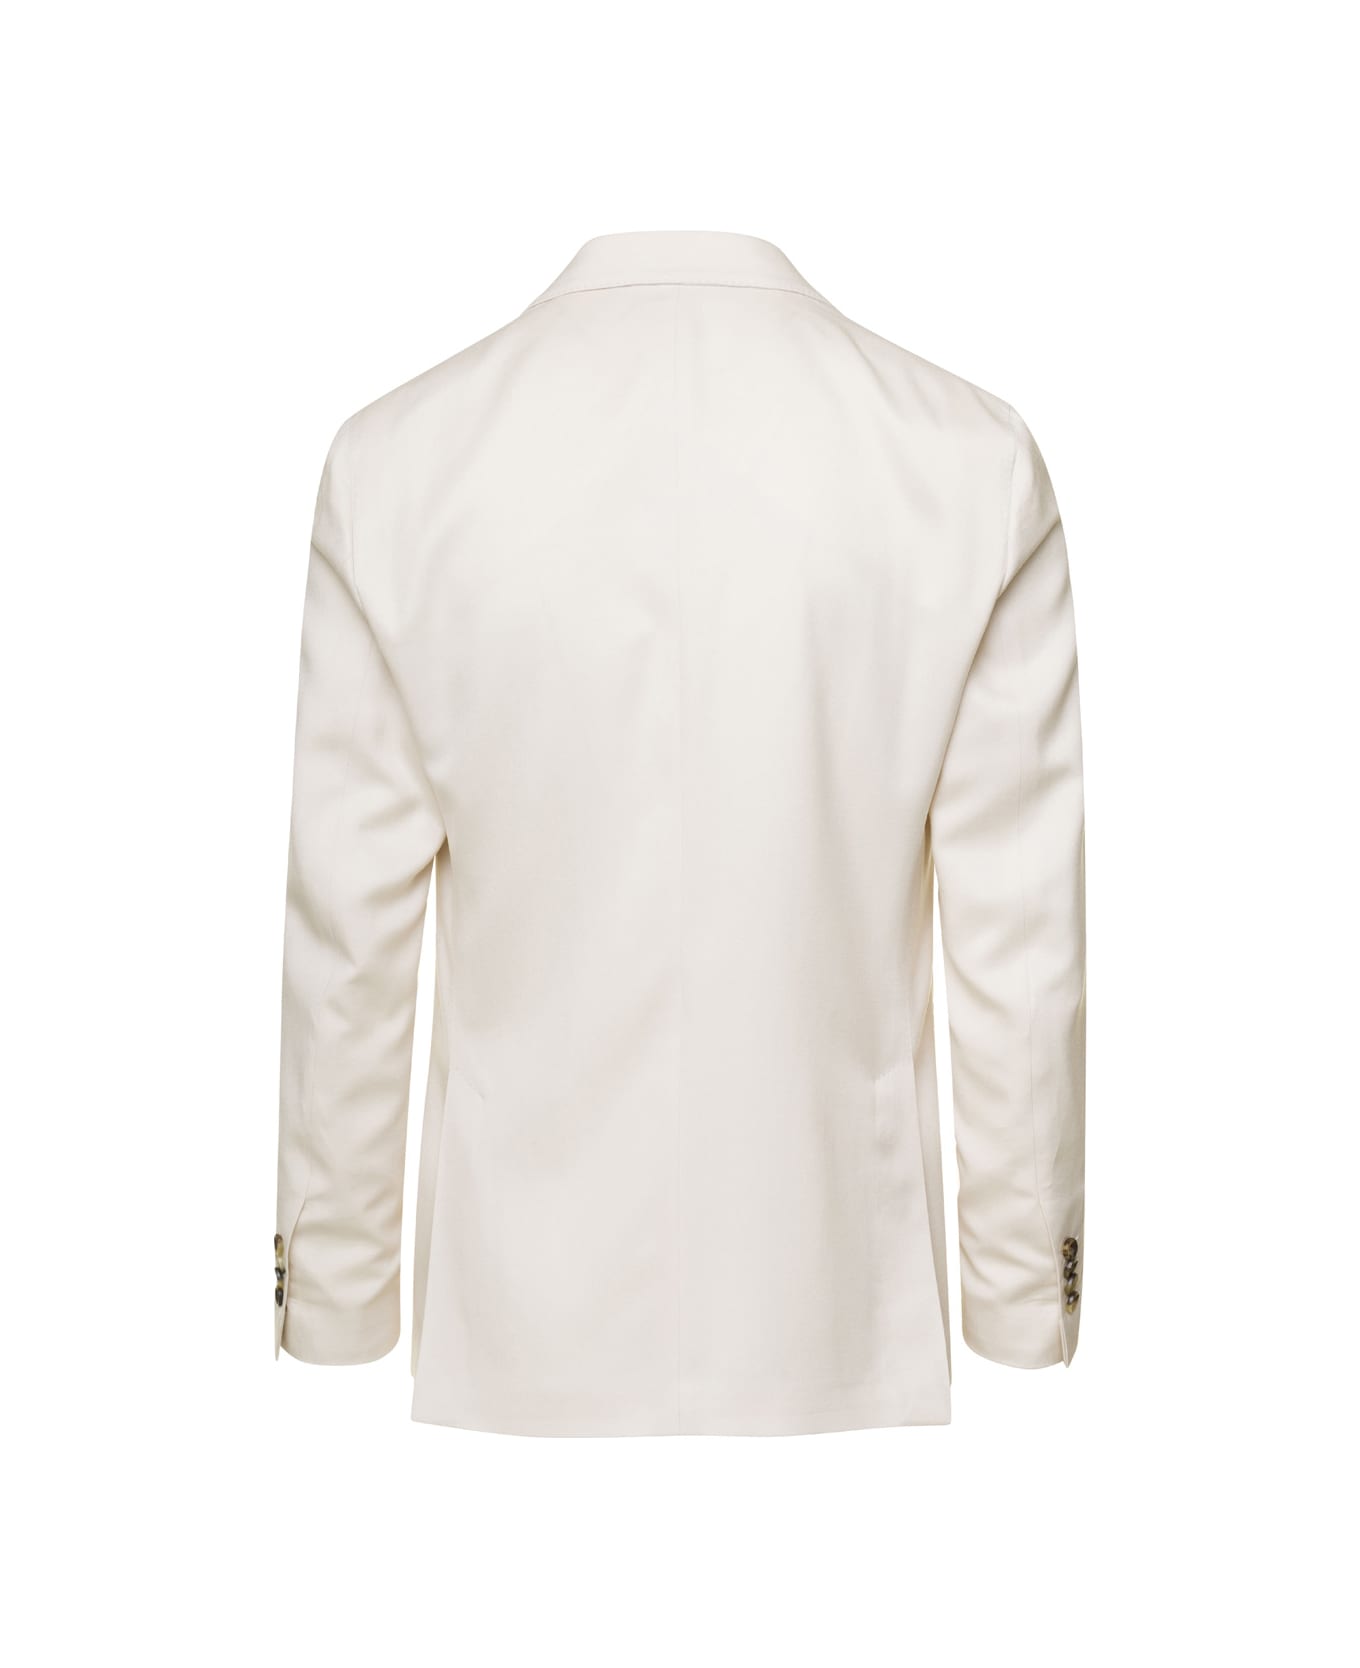 Lardini Beige Jacket With Classic Collar And Pockets In Cashmere & Silk Blend Man - Beige